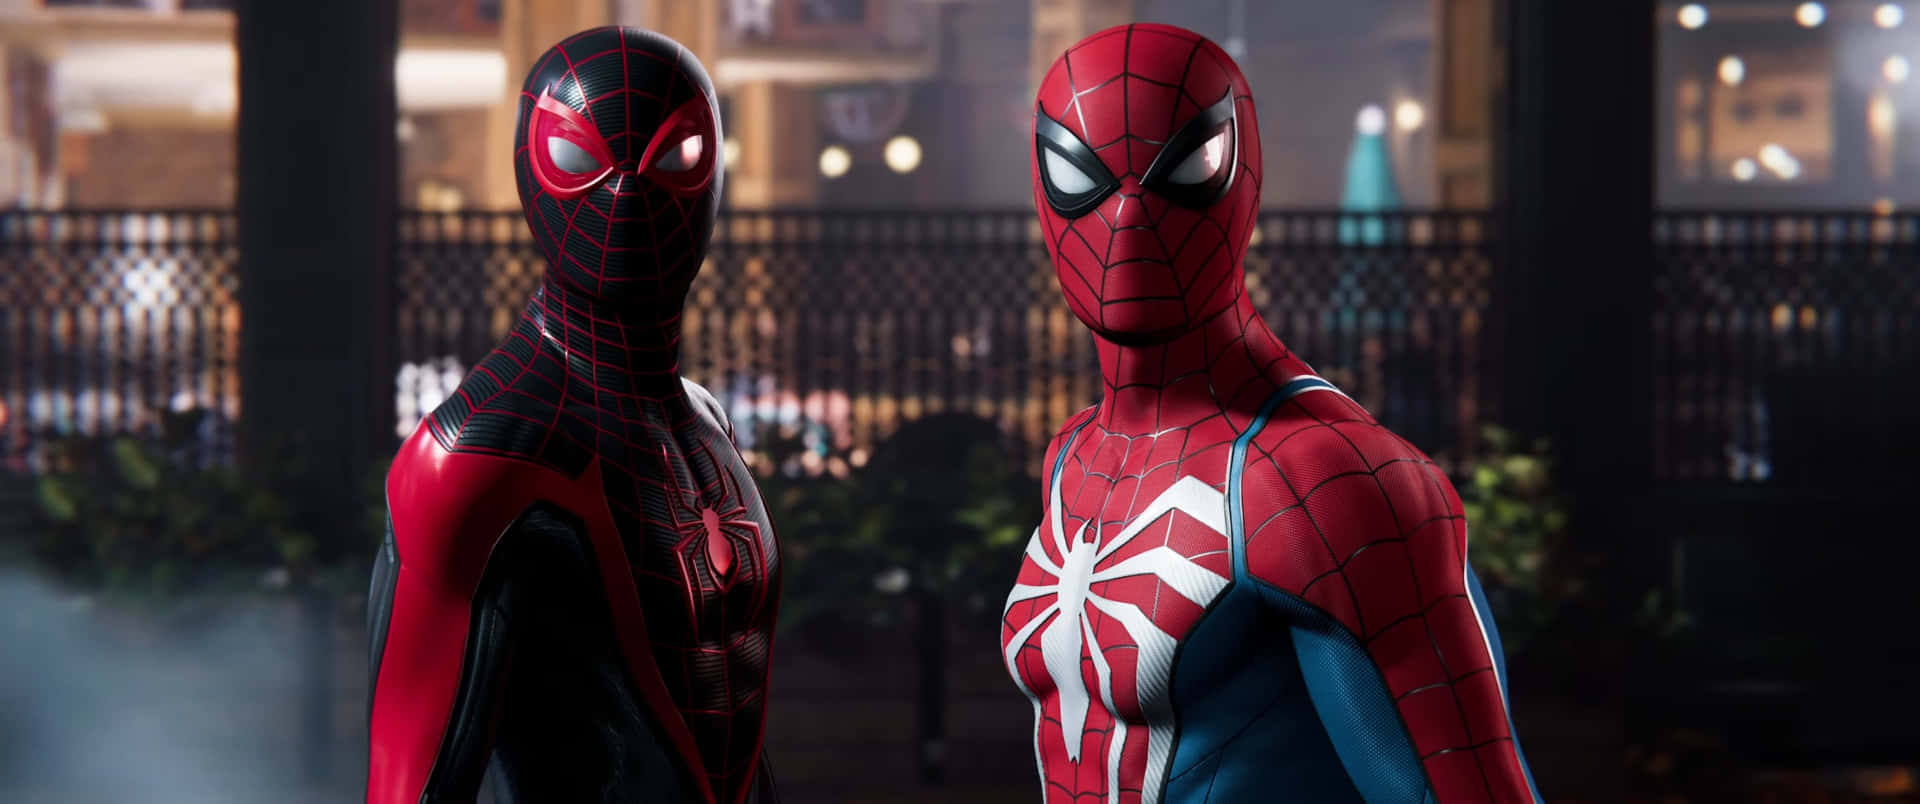 Two Spider - Man Characters Standing Next To Each Other Wallpaper